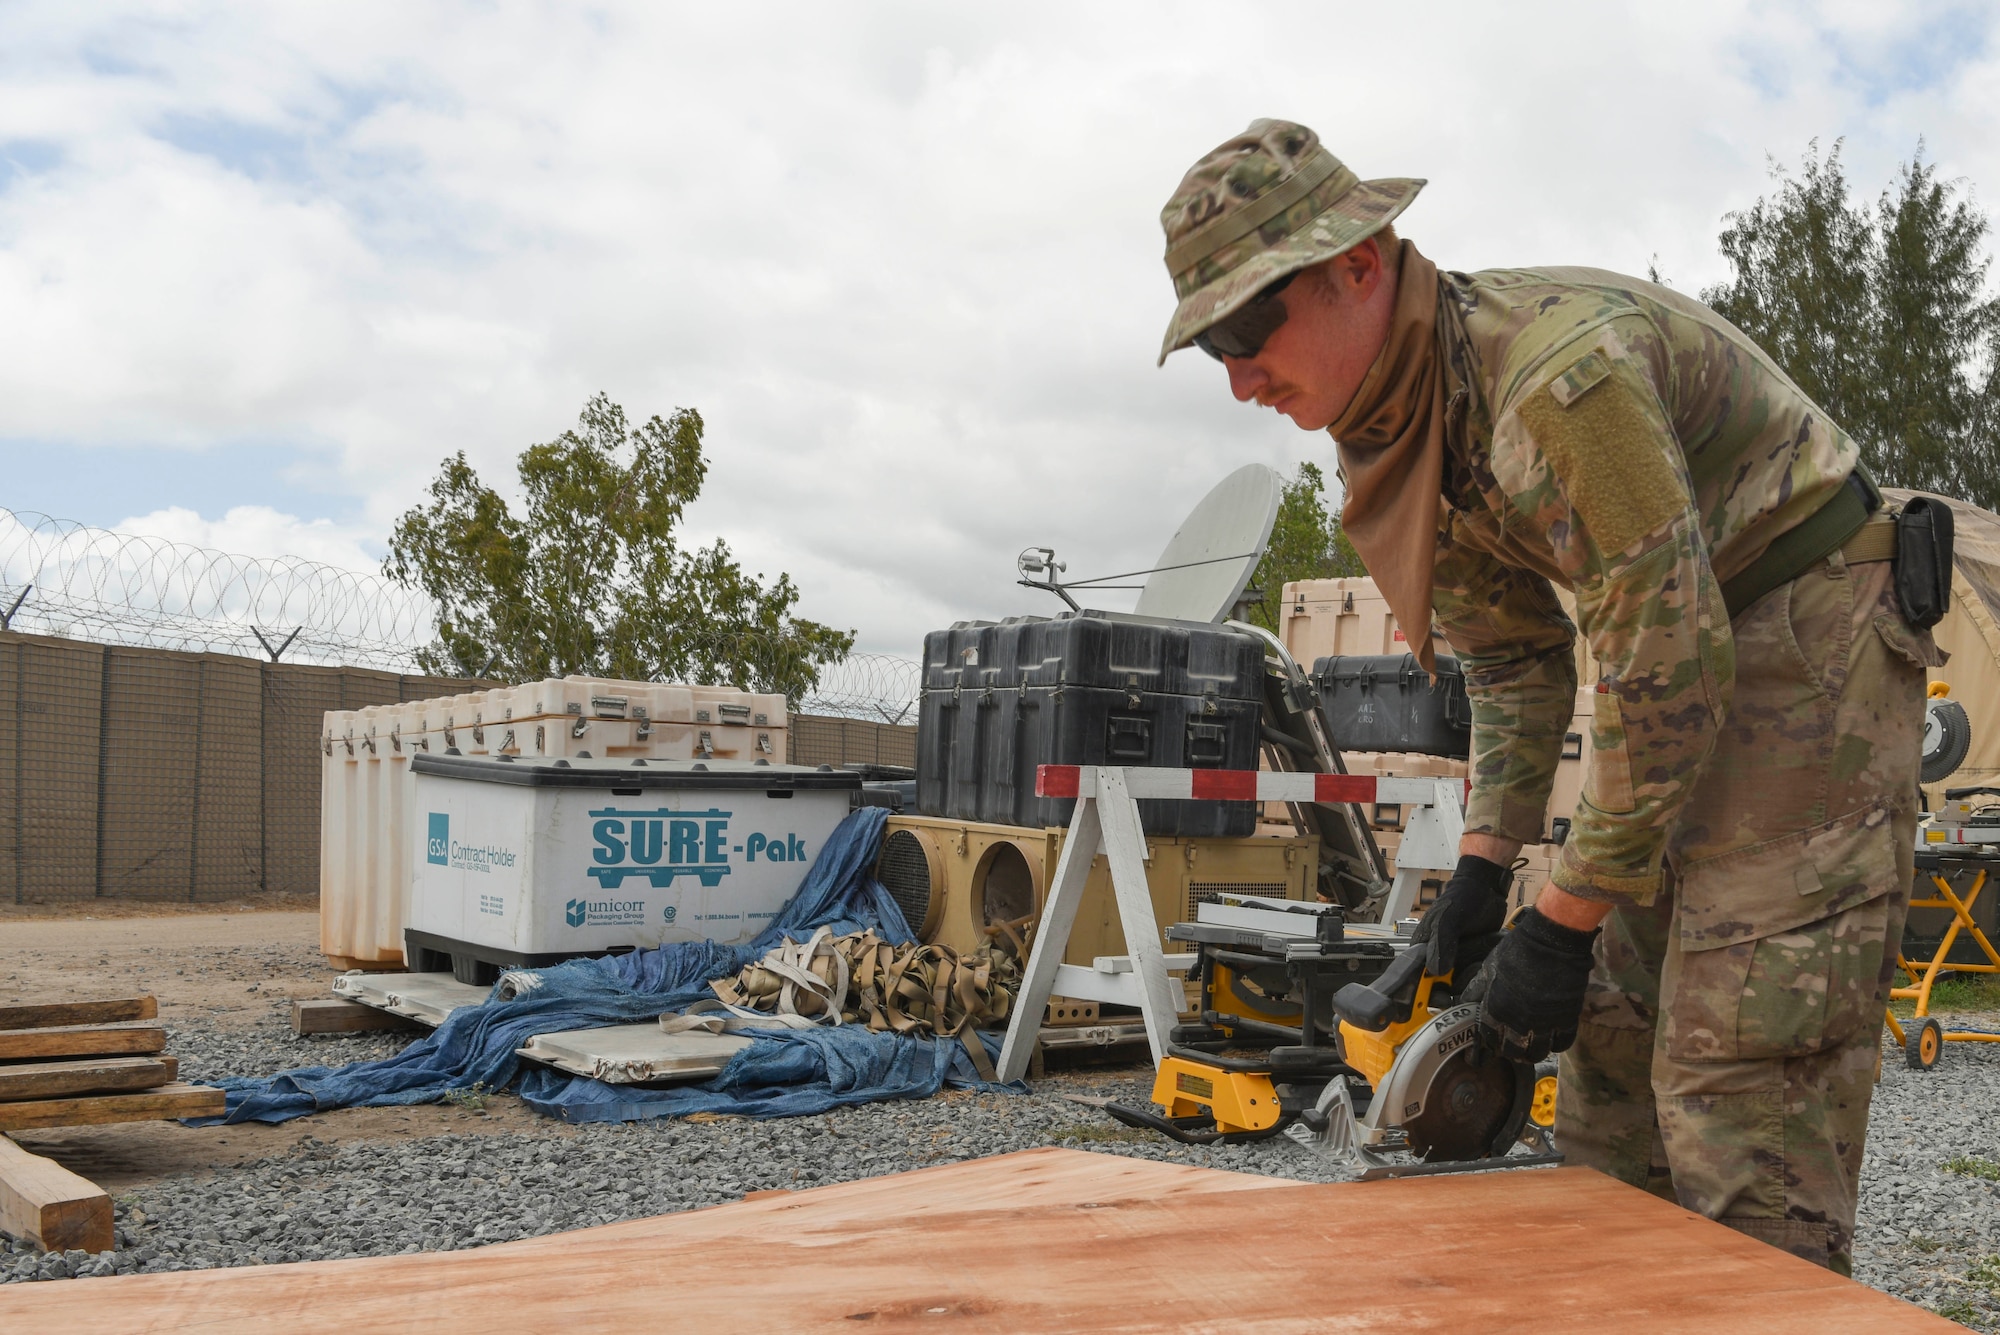 U.S. Air Force Staff Sgt. Garison Dollar, 786th Civil Engineer Squadron structural specialist, prepares to cut a wall cutout March 23, 2021, at Camp Simba, Kenya. The 786th CES deployed to Camp Simba to help expand the base, as well as to provide the base with improvements to quality of life.